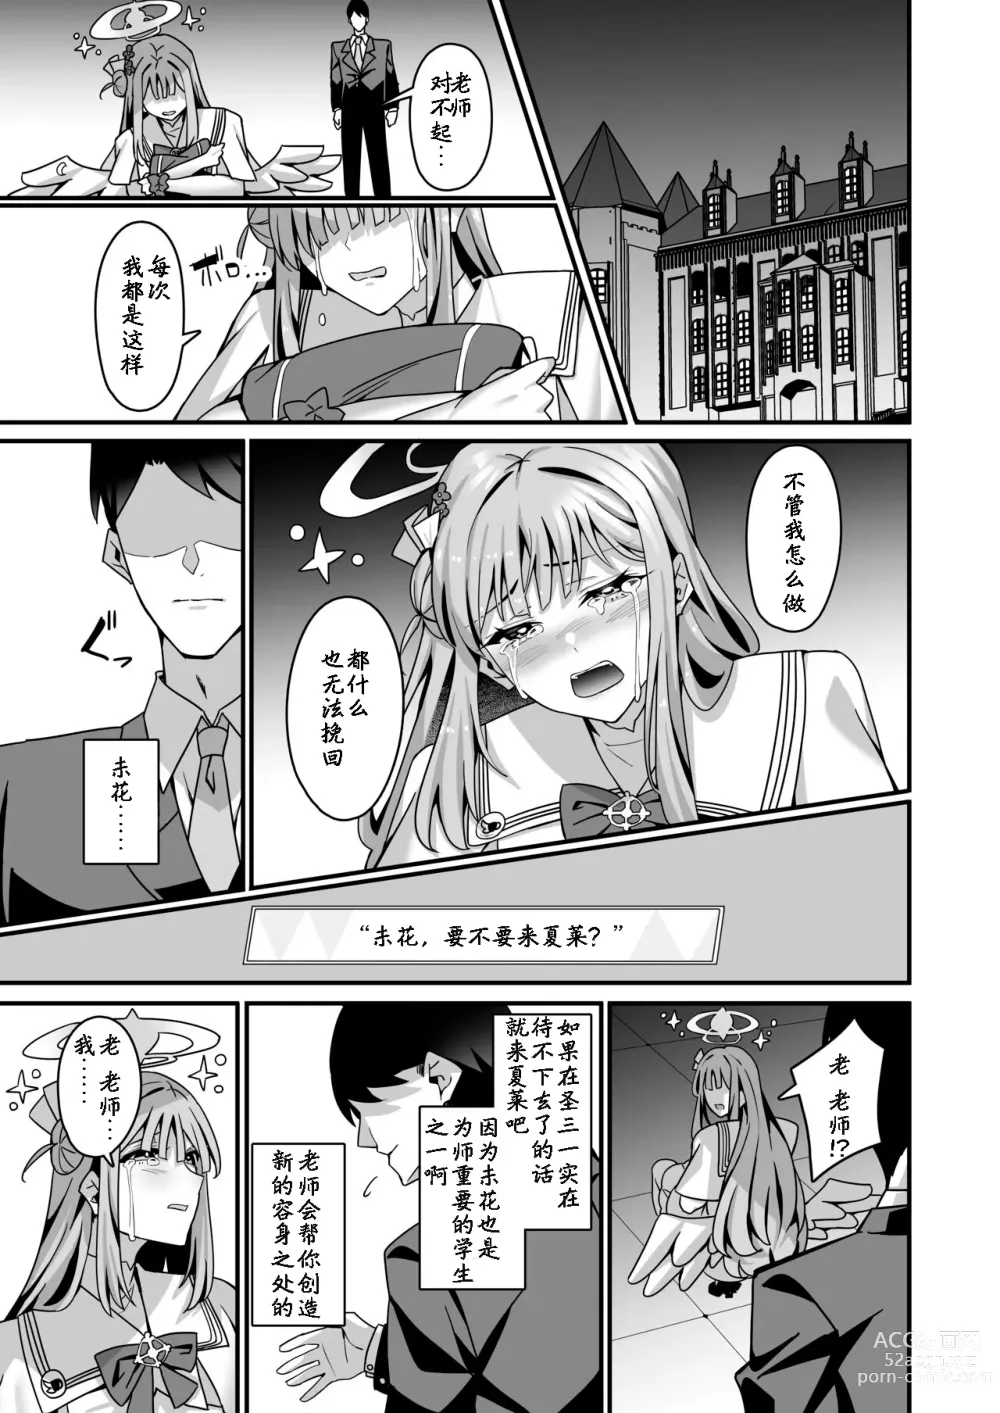 Page 2 of doujinshi Mika to Happy Love Love Sex Shite Haramaseru Hon - A book about happy loving sex with Mika and impregnation.